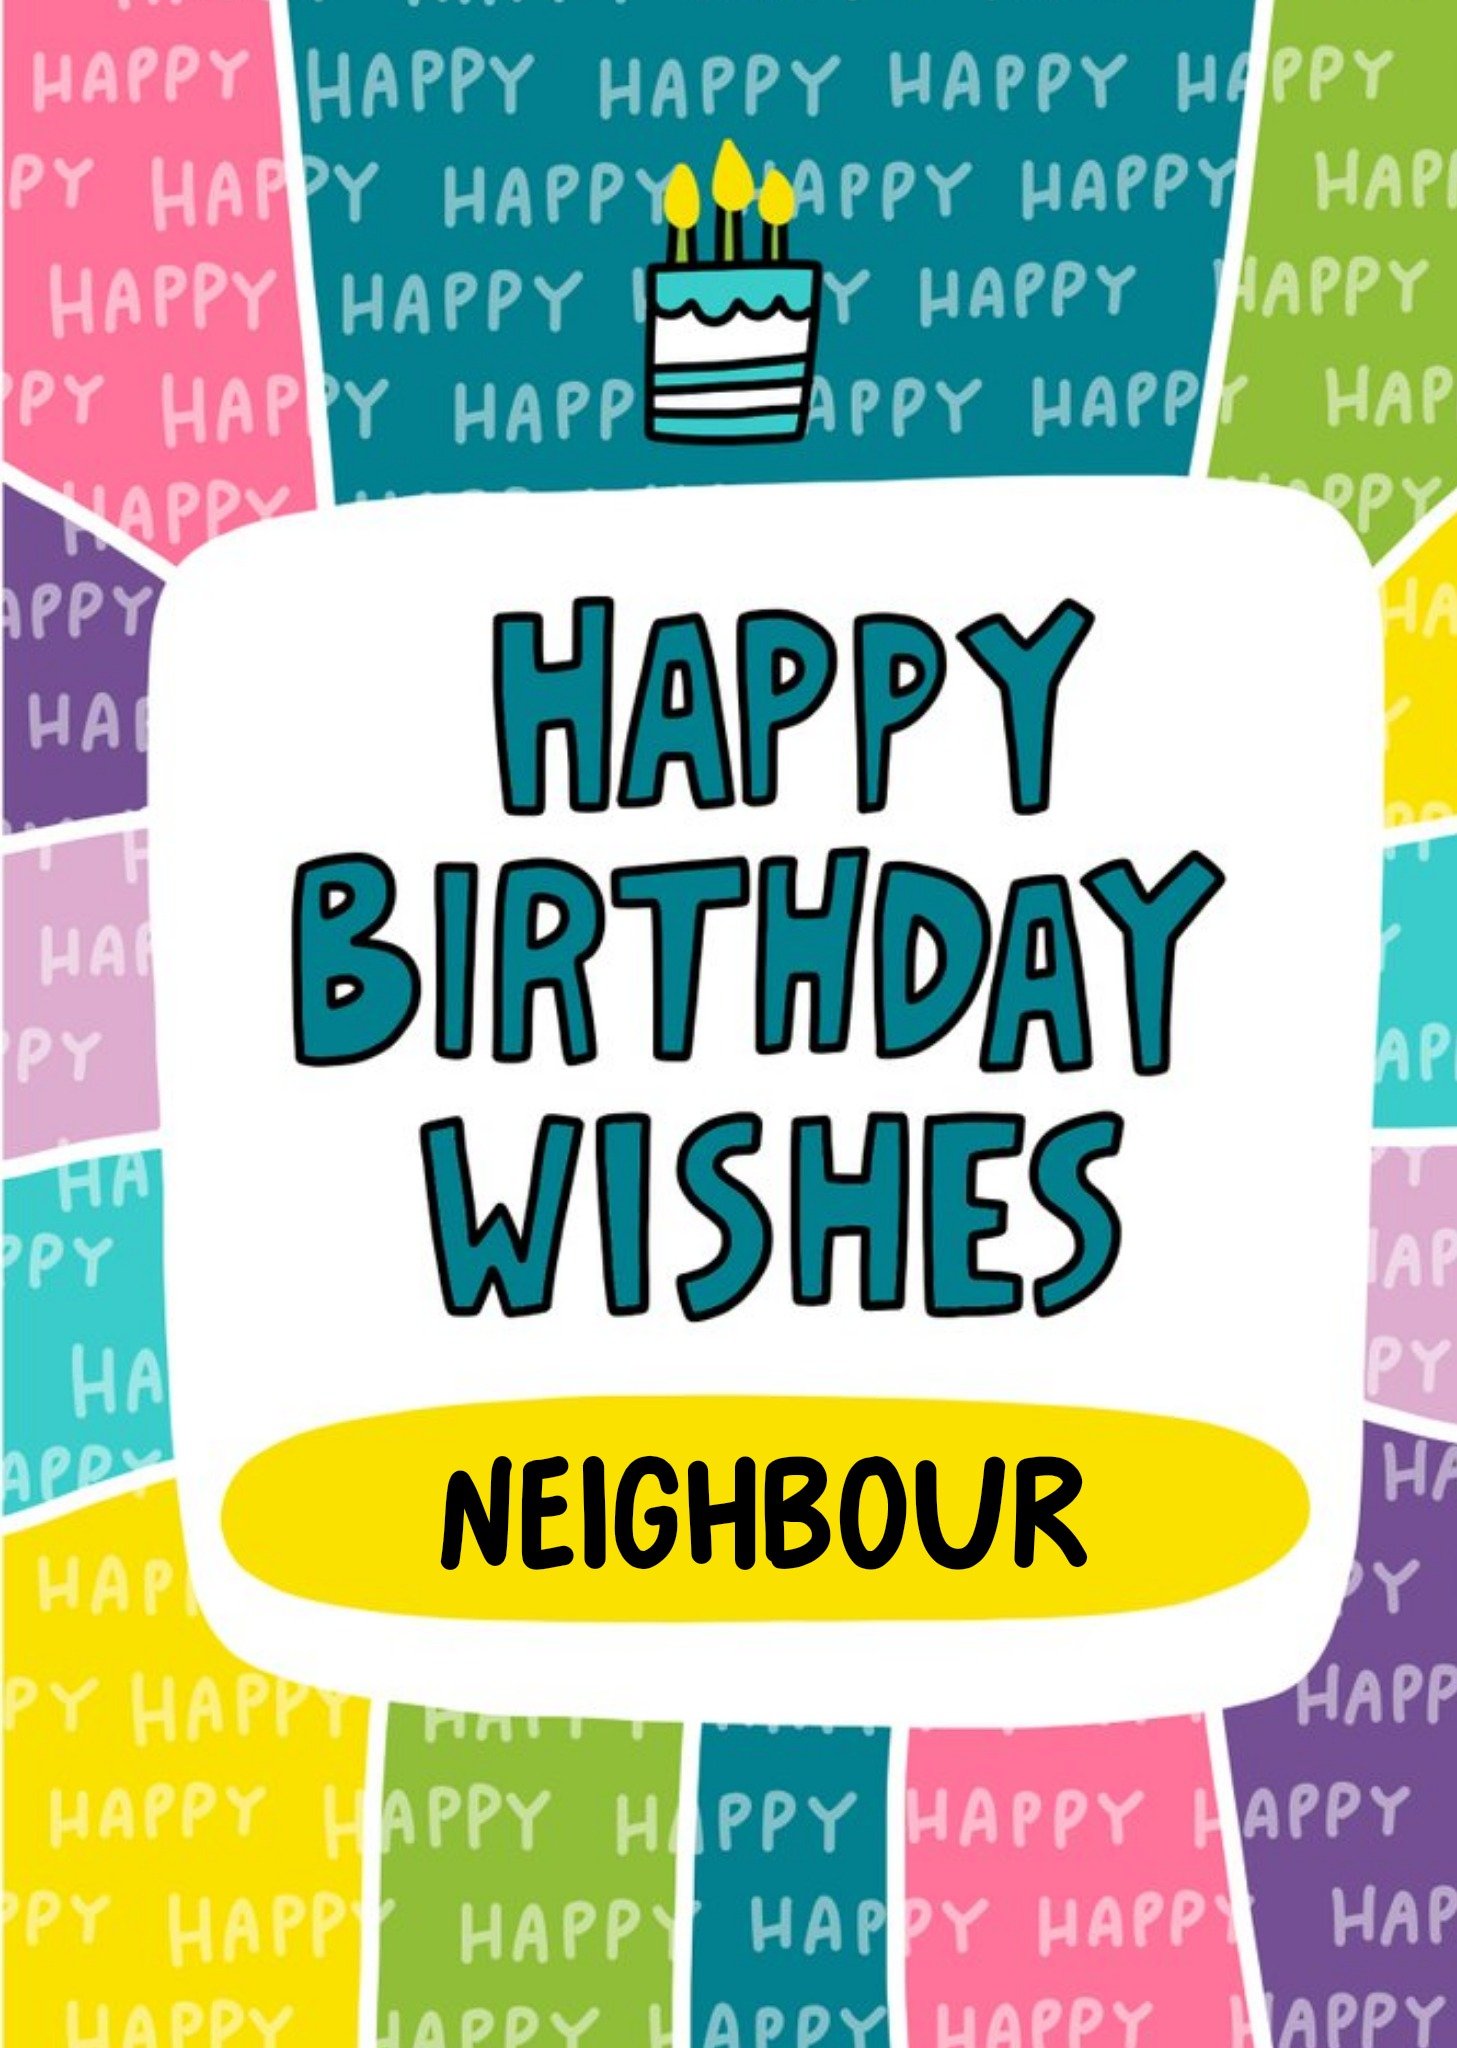 Moonpig Colourful Tiled Border With Cake Illustration Neighbour Birthday Wishes Card, Large